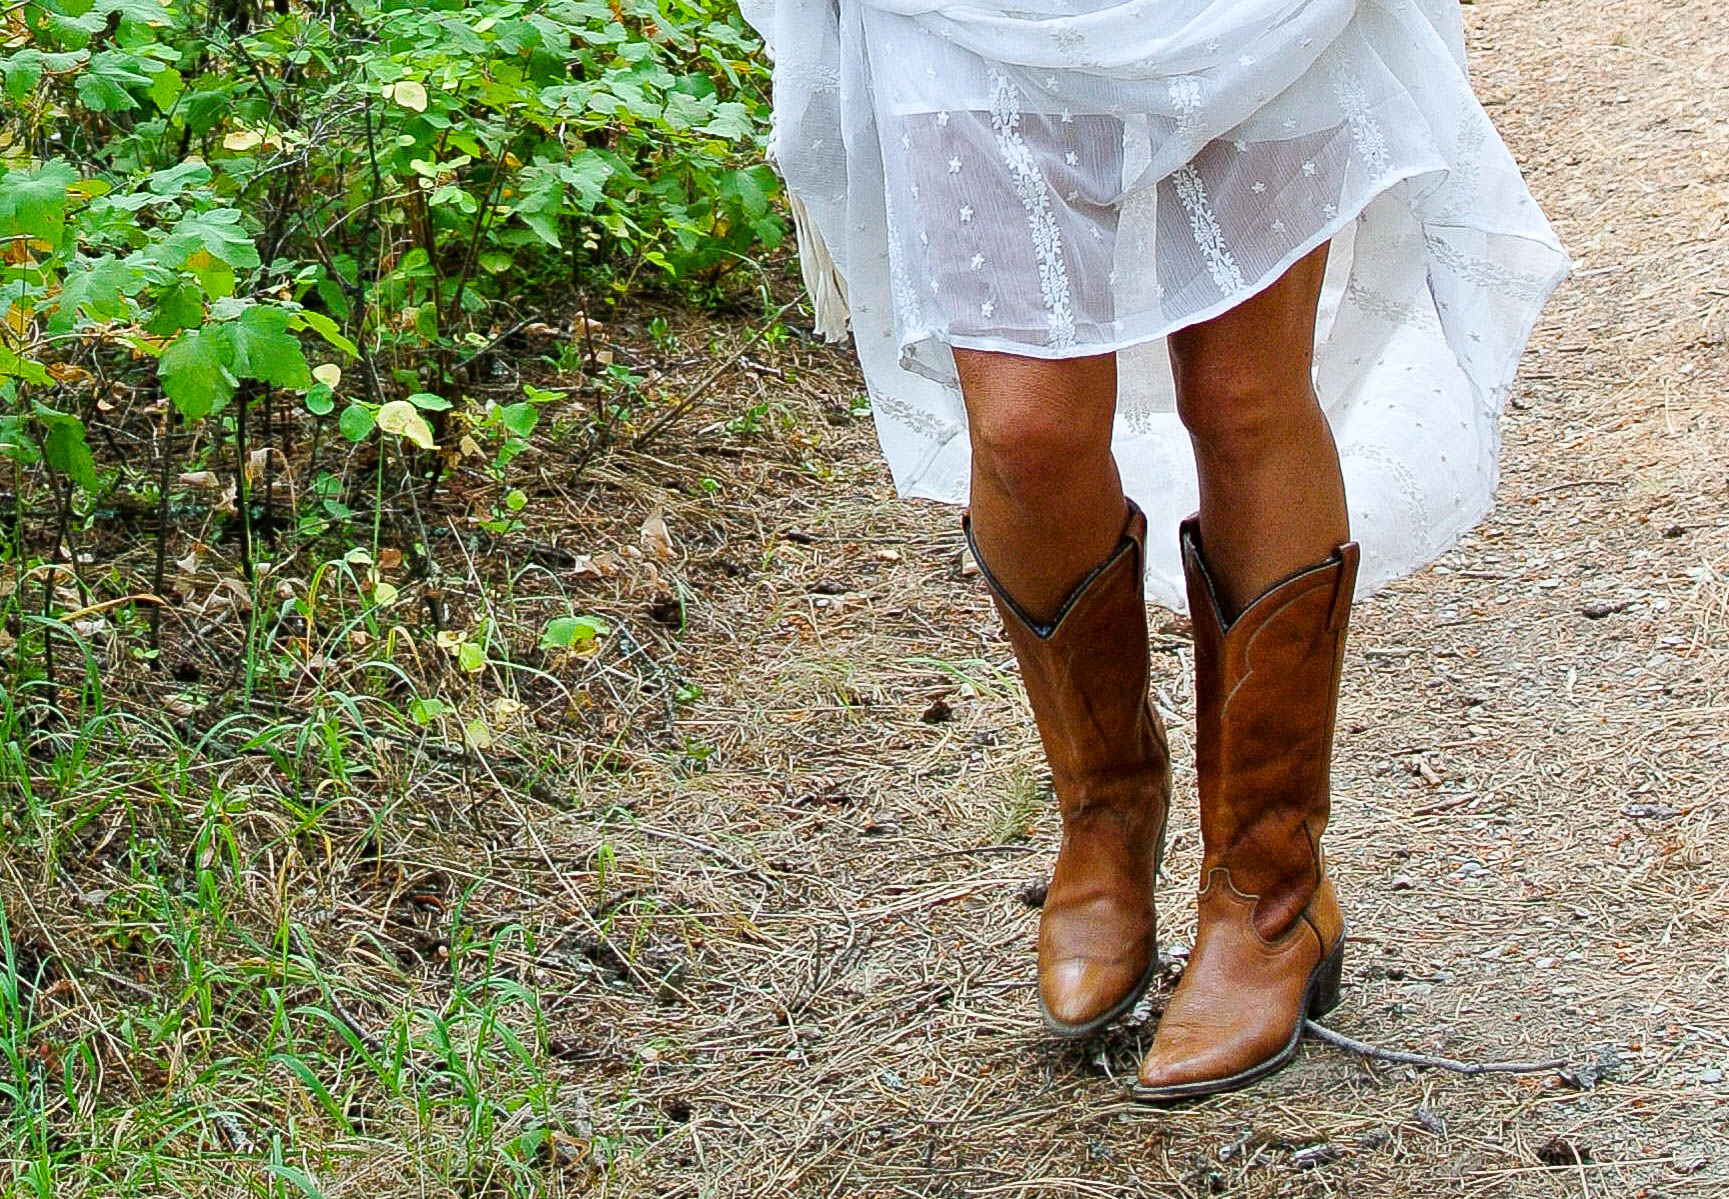 sundresses with cowboy boots